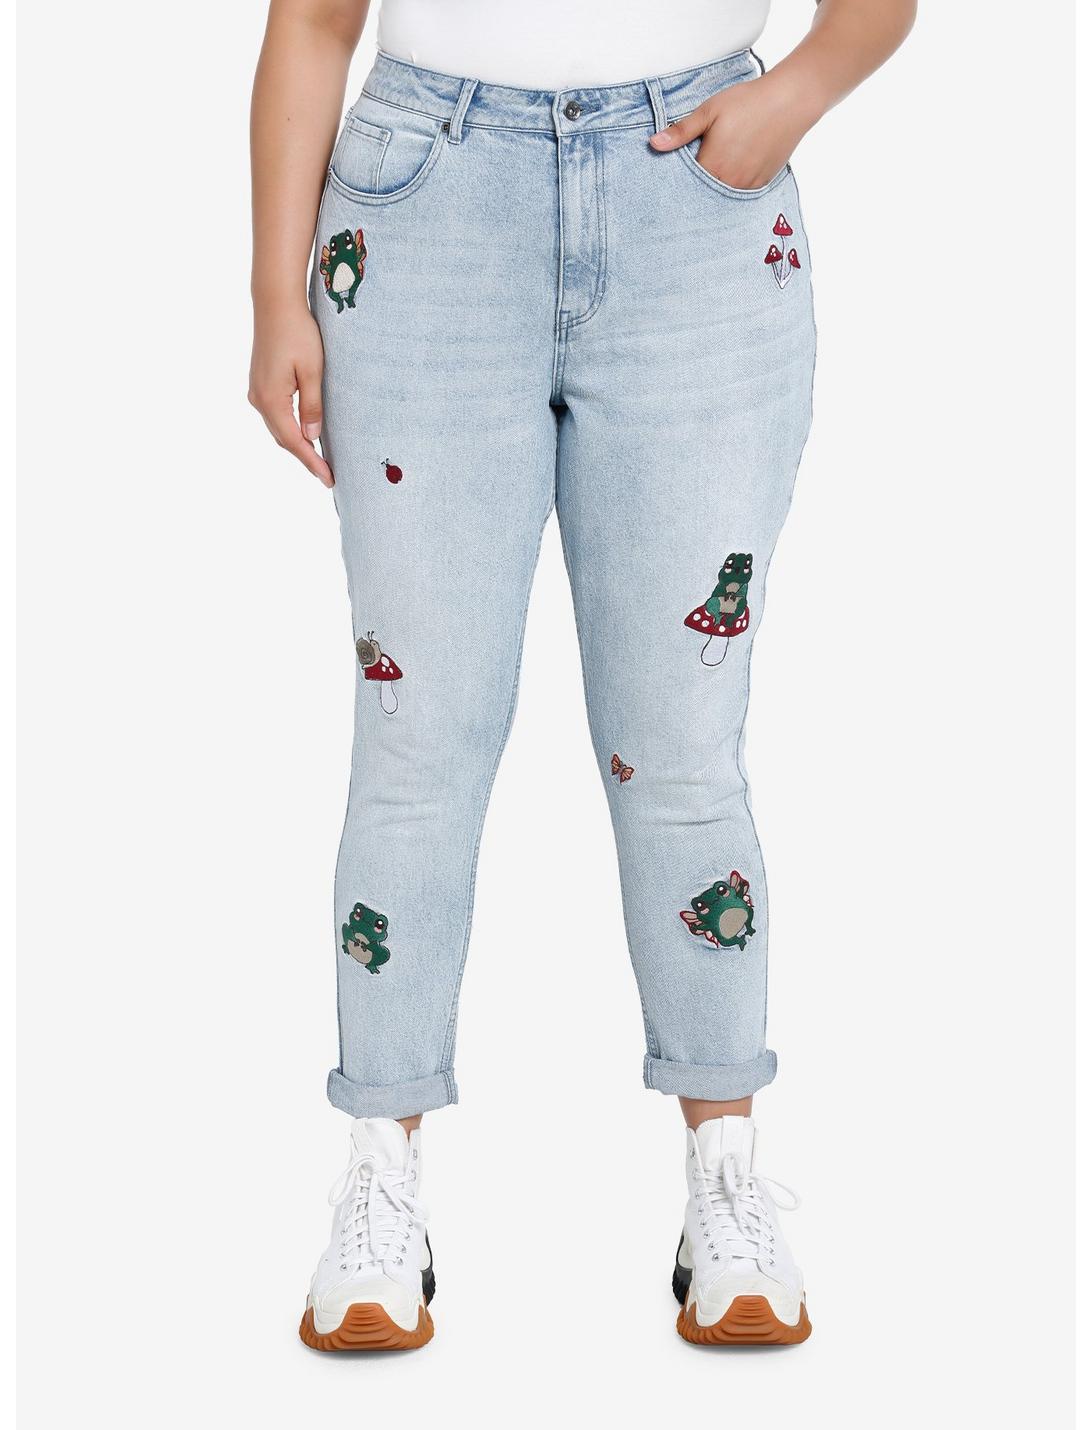 HT Denim Frogs & Mushrooms Embroidered Mom Jeans Plus Size